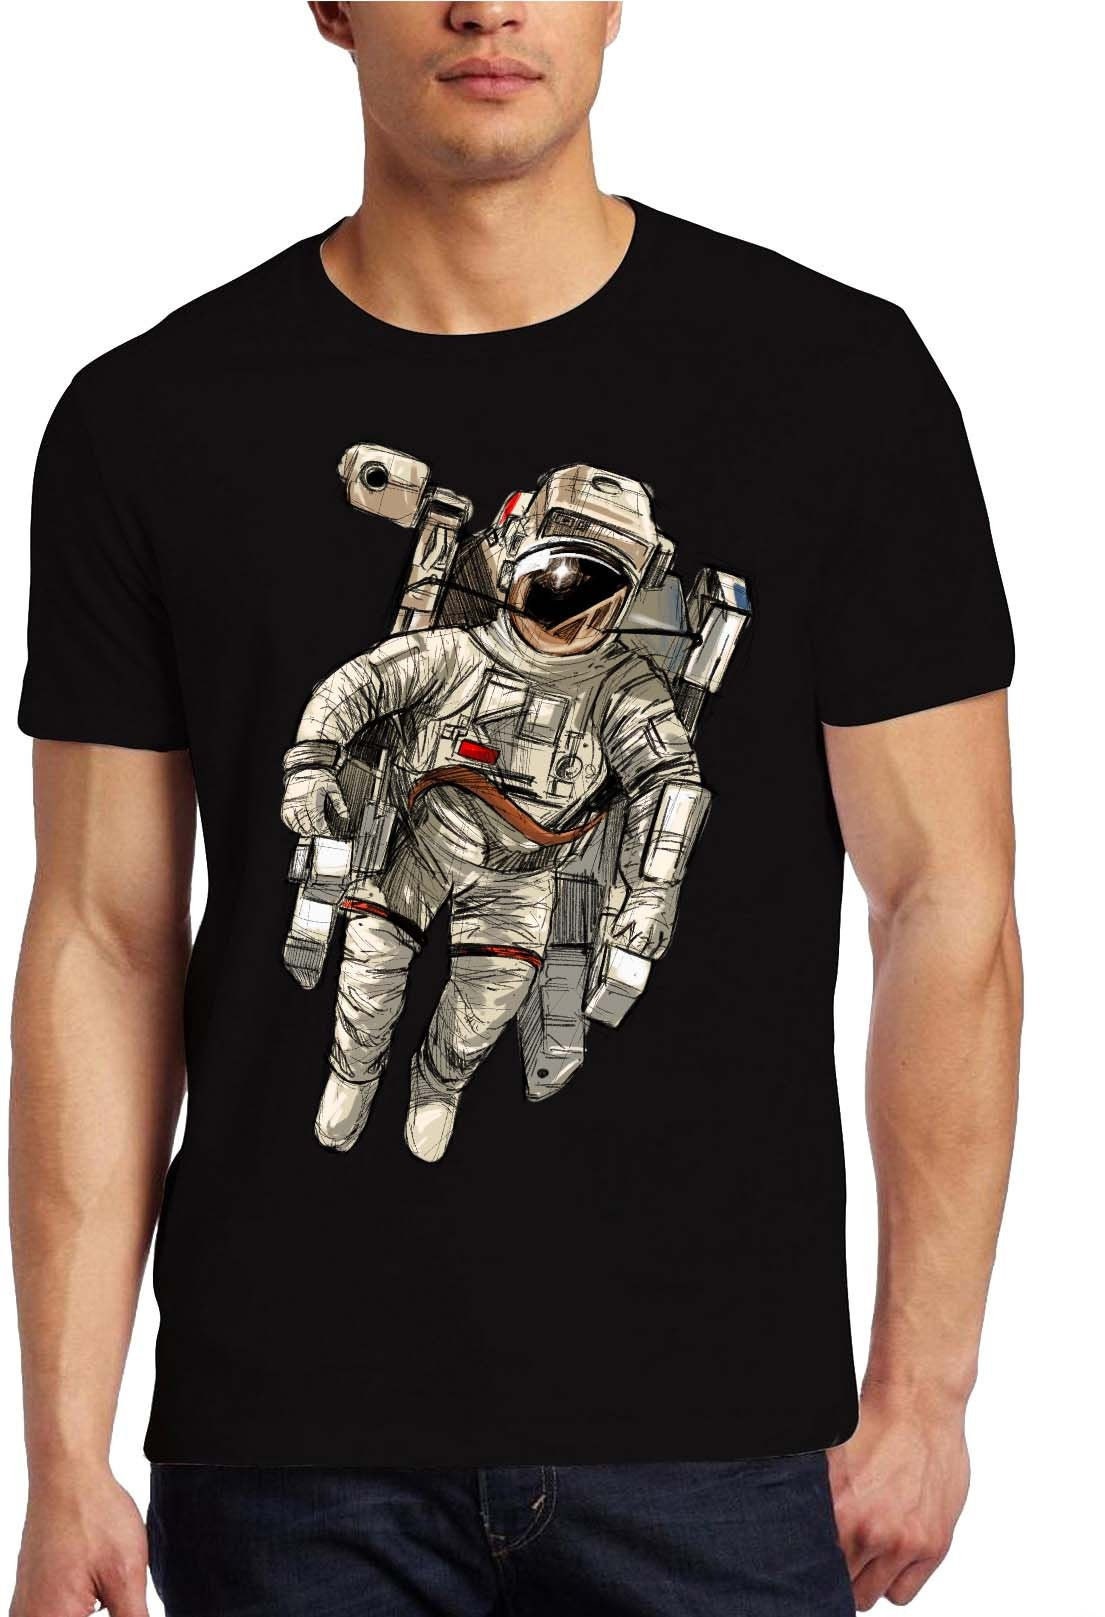 Spaceman Cool Graphic Shirt Astronaut Artistic Design - Etsy